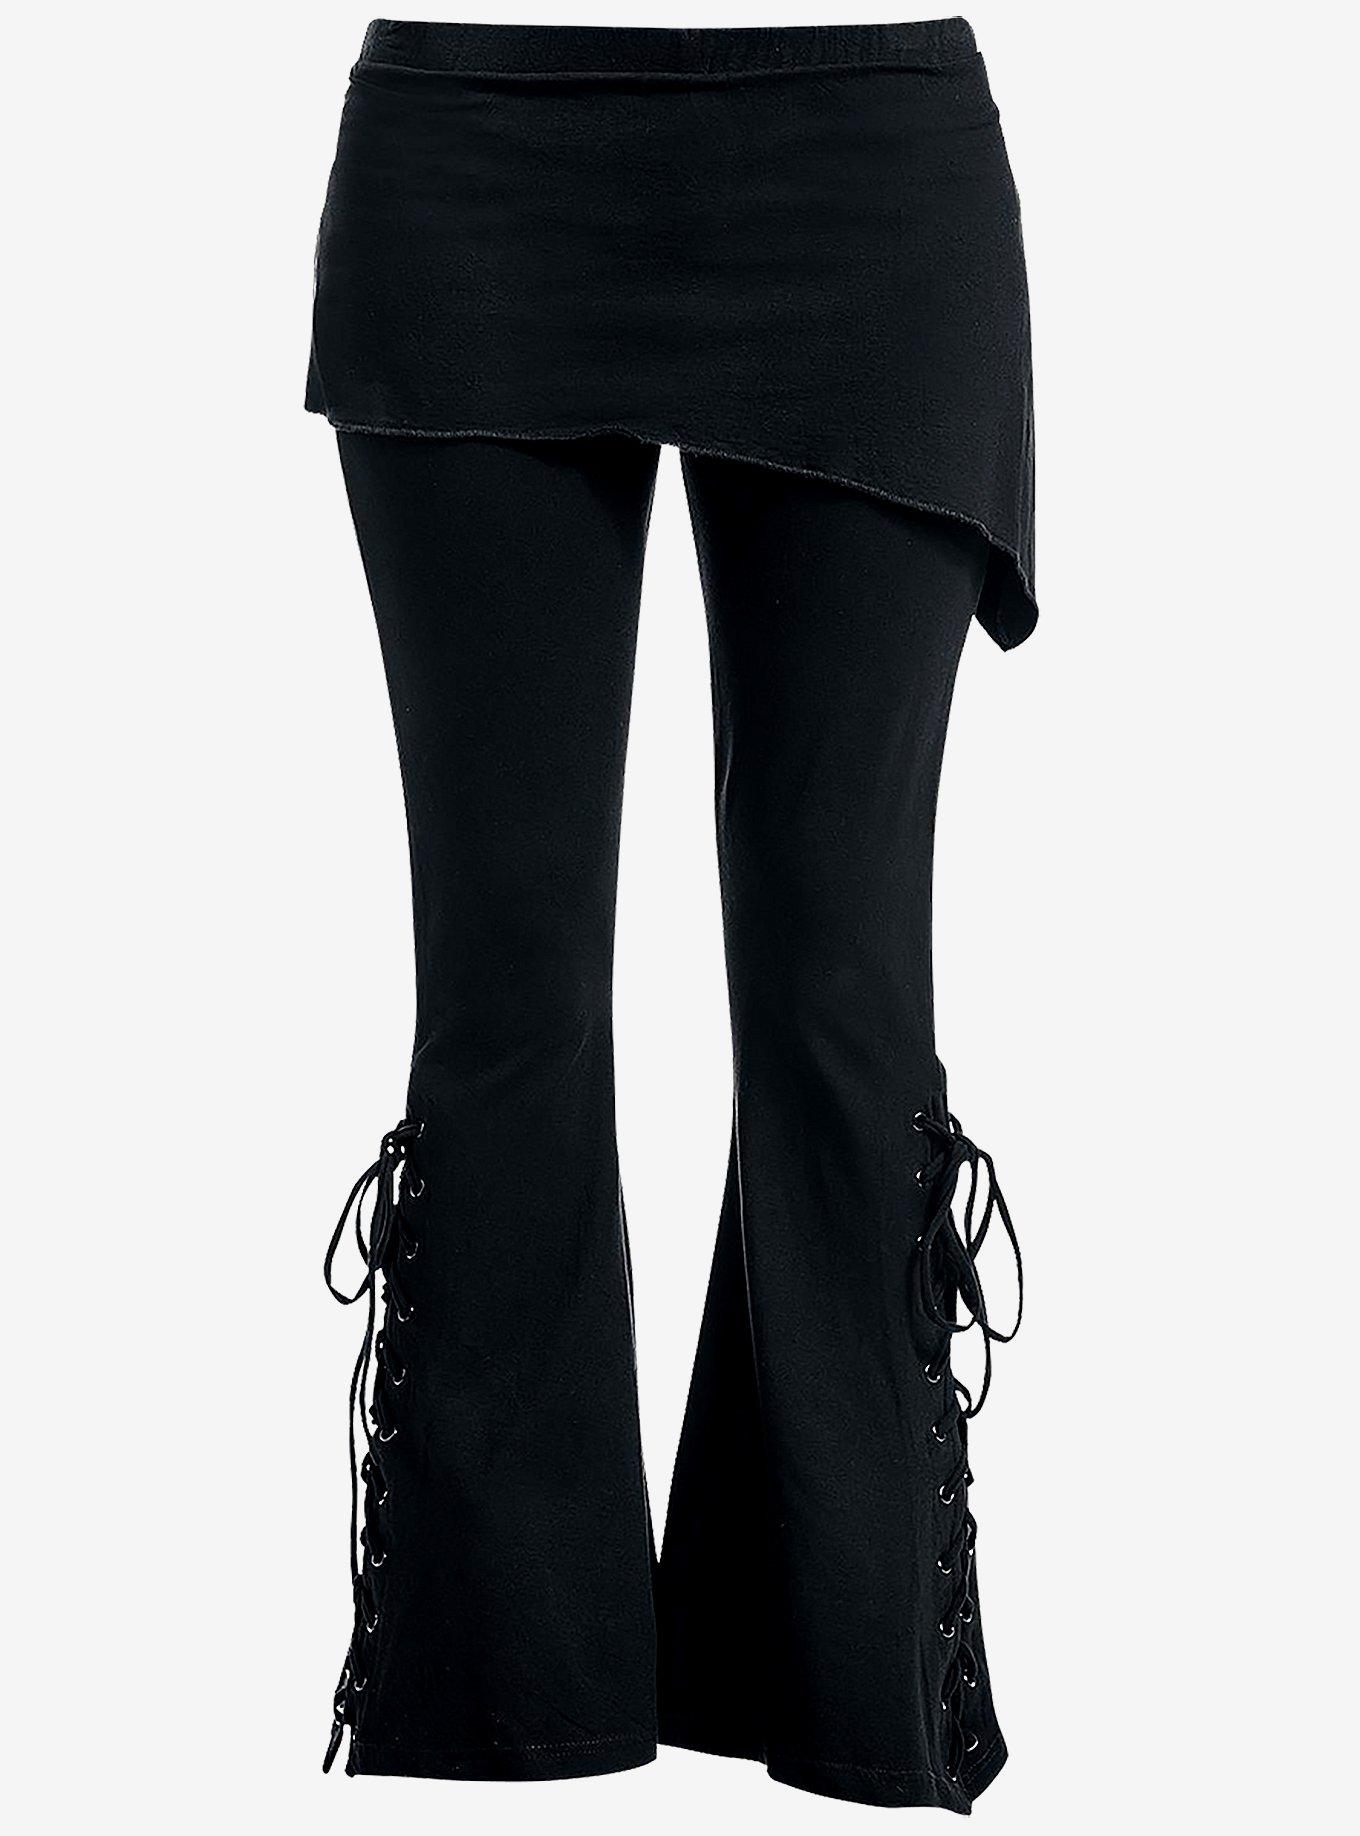 Lace Up Flare Leggings | Hot Topic